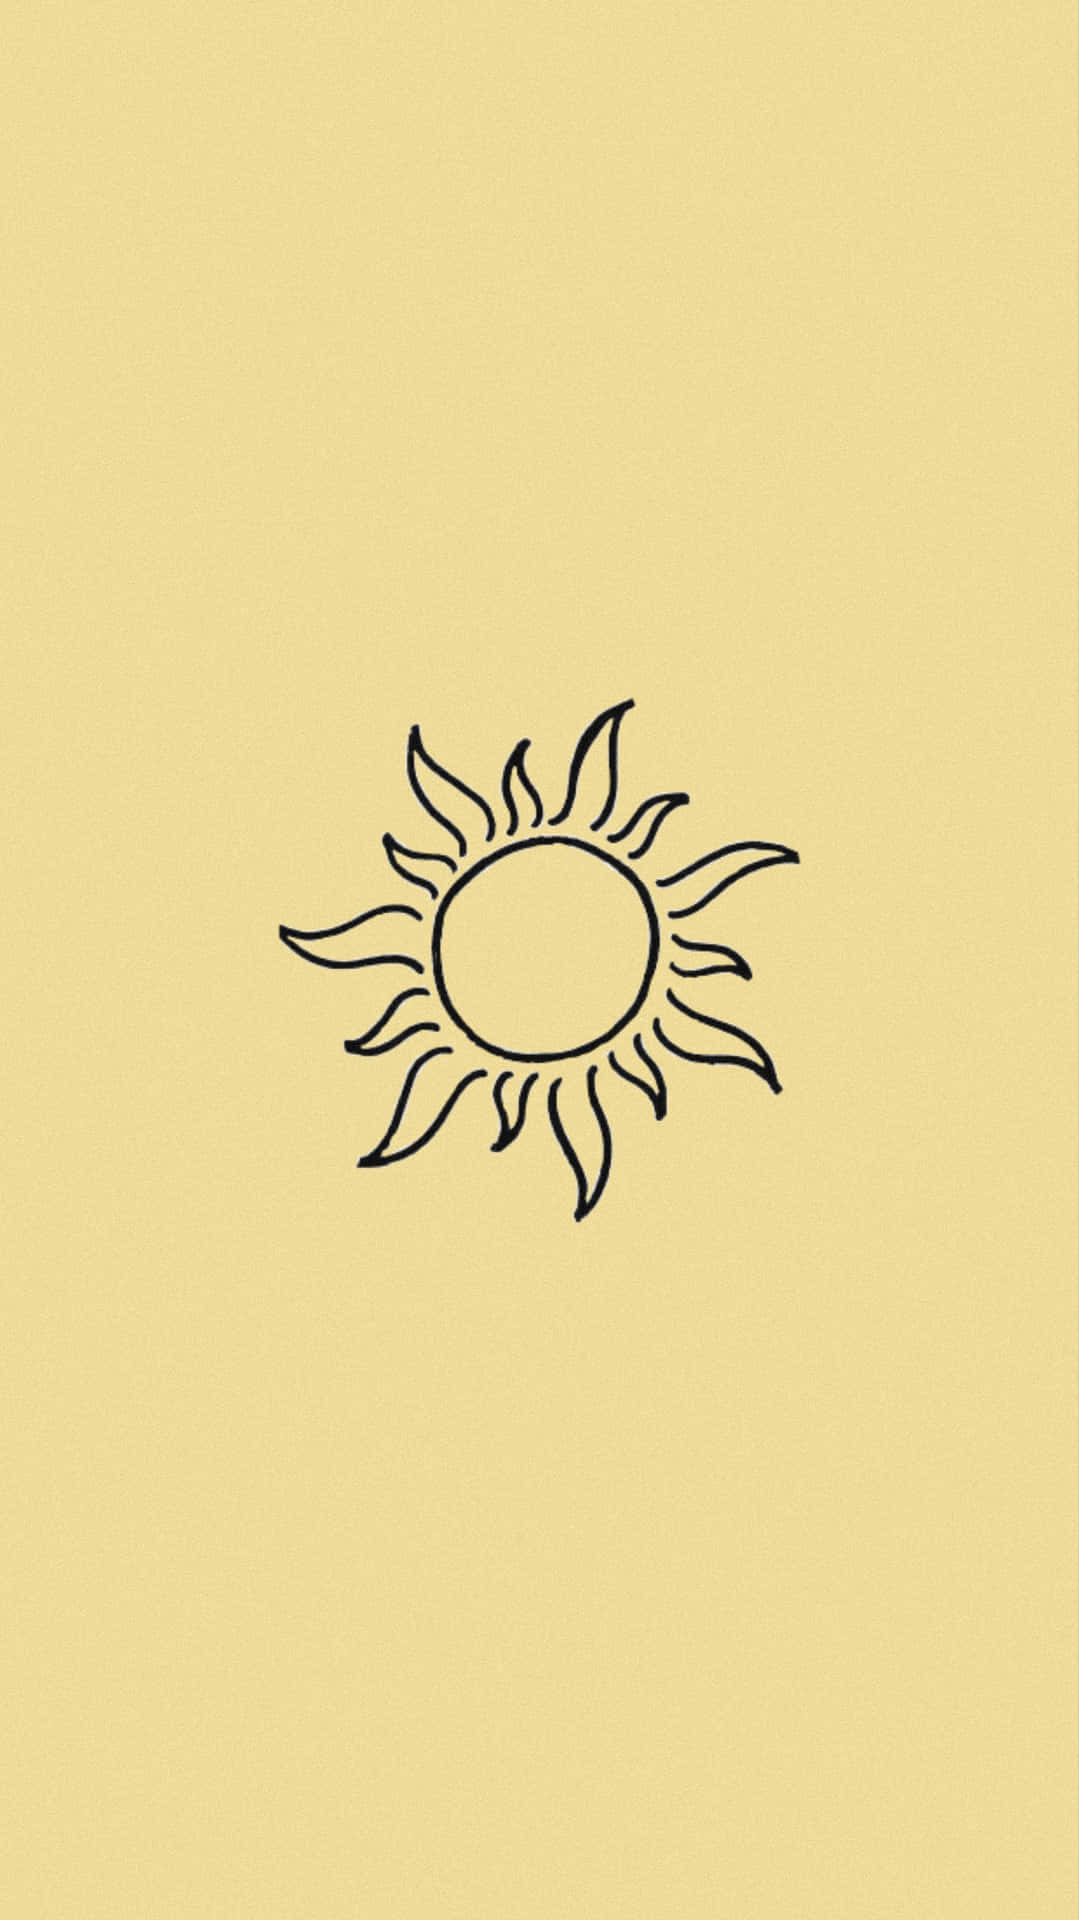 A black and white sun on yellow background - Sunshine